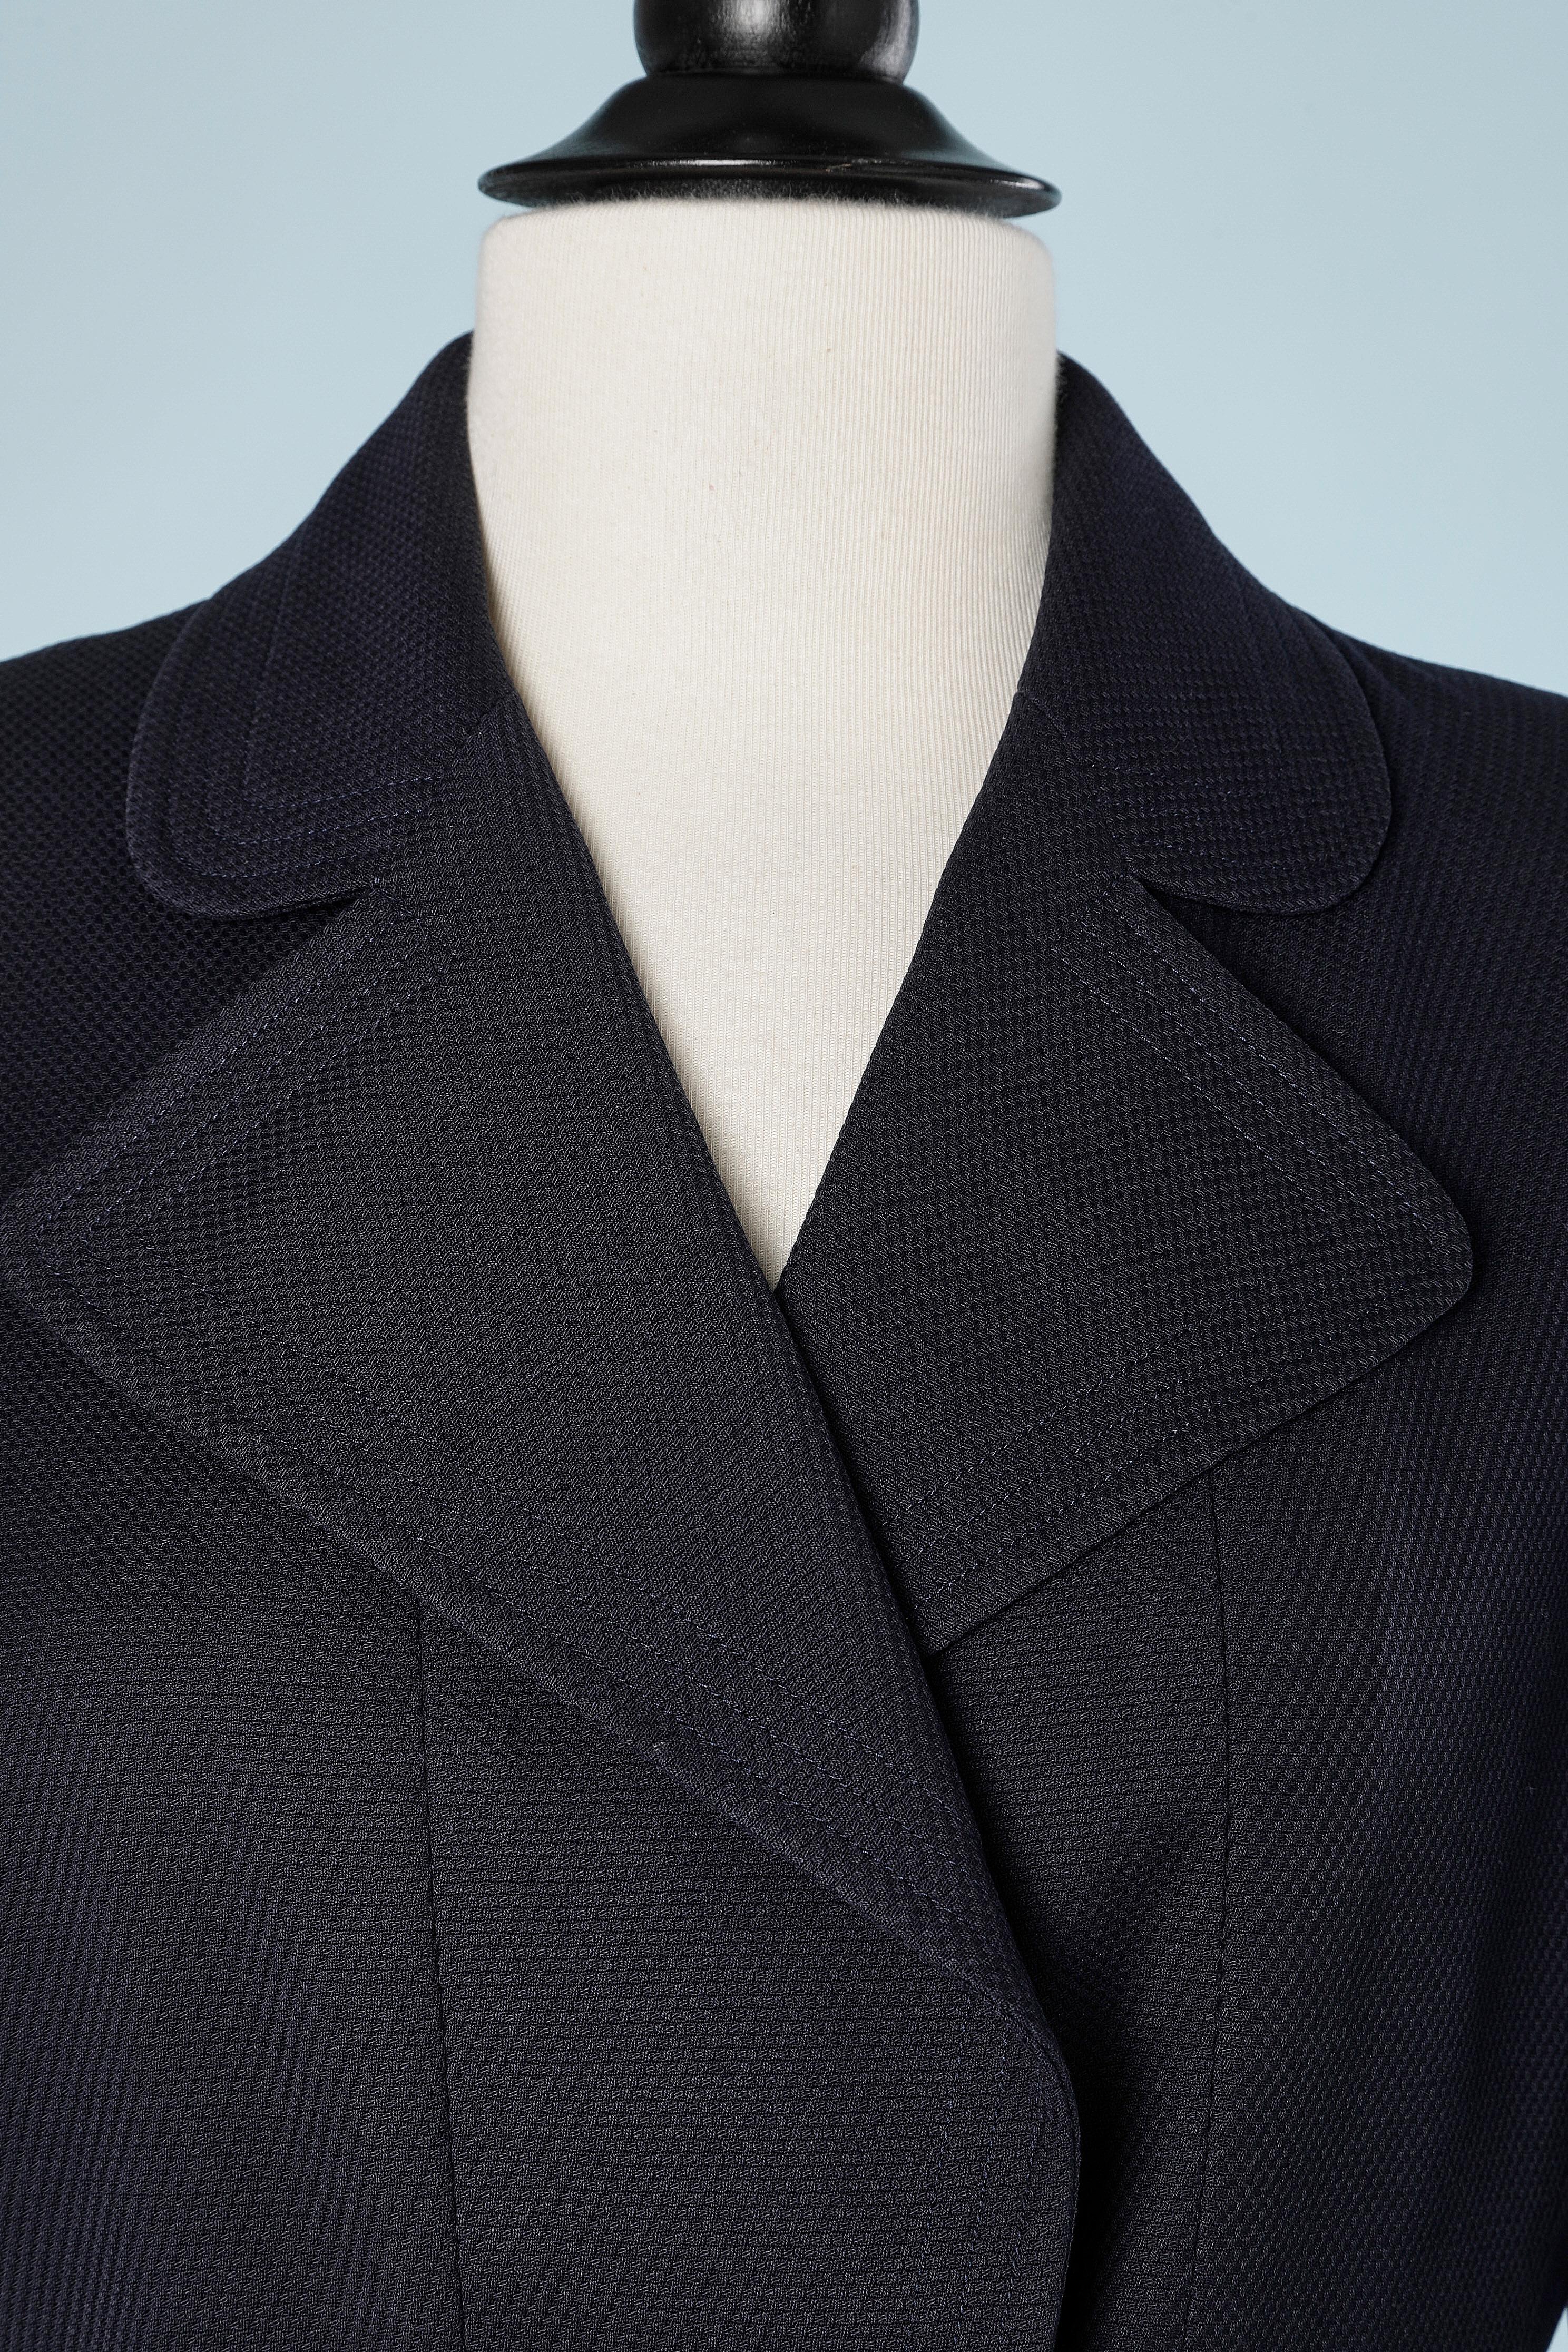 Double-breasted navy blue cotton jacket.Top-stitched edge (Collar, pockets, sleeves edge) . Branded buttons. Shoulder pads. Silk branded lining.
SIZE 42 